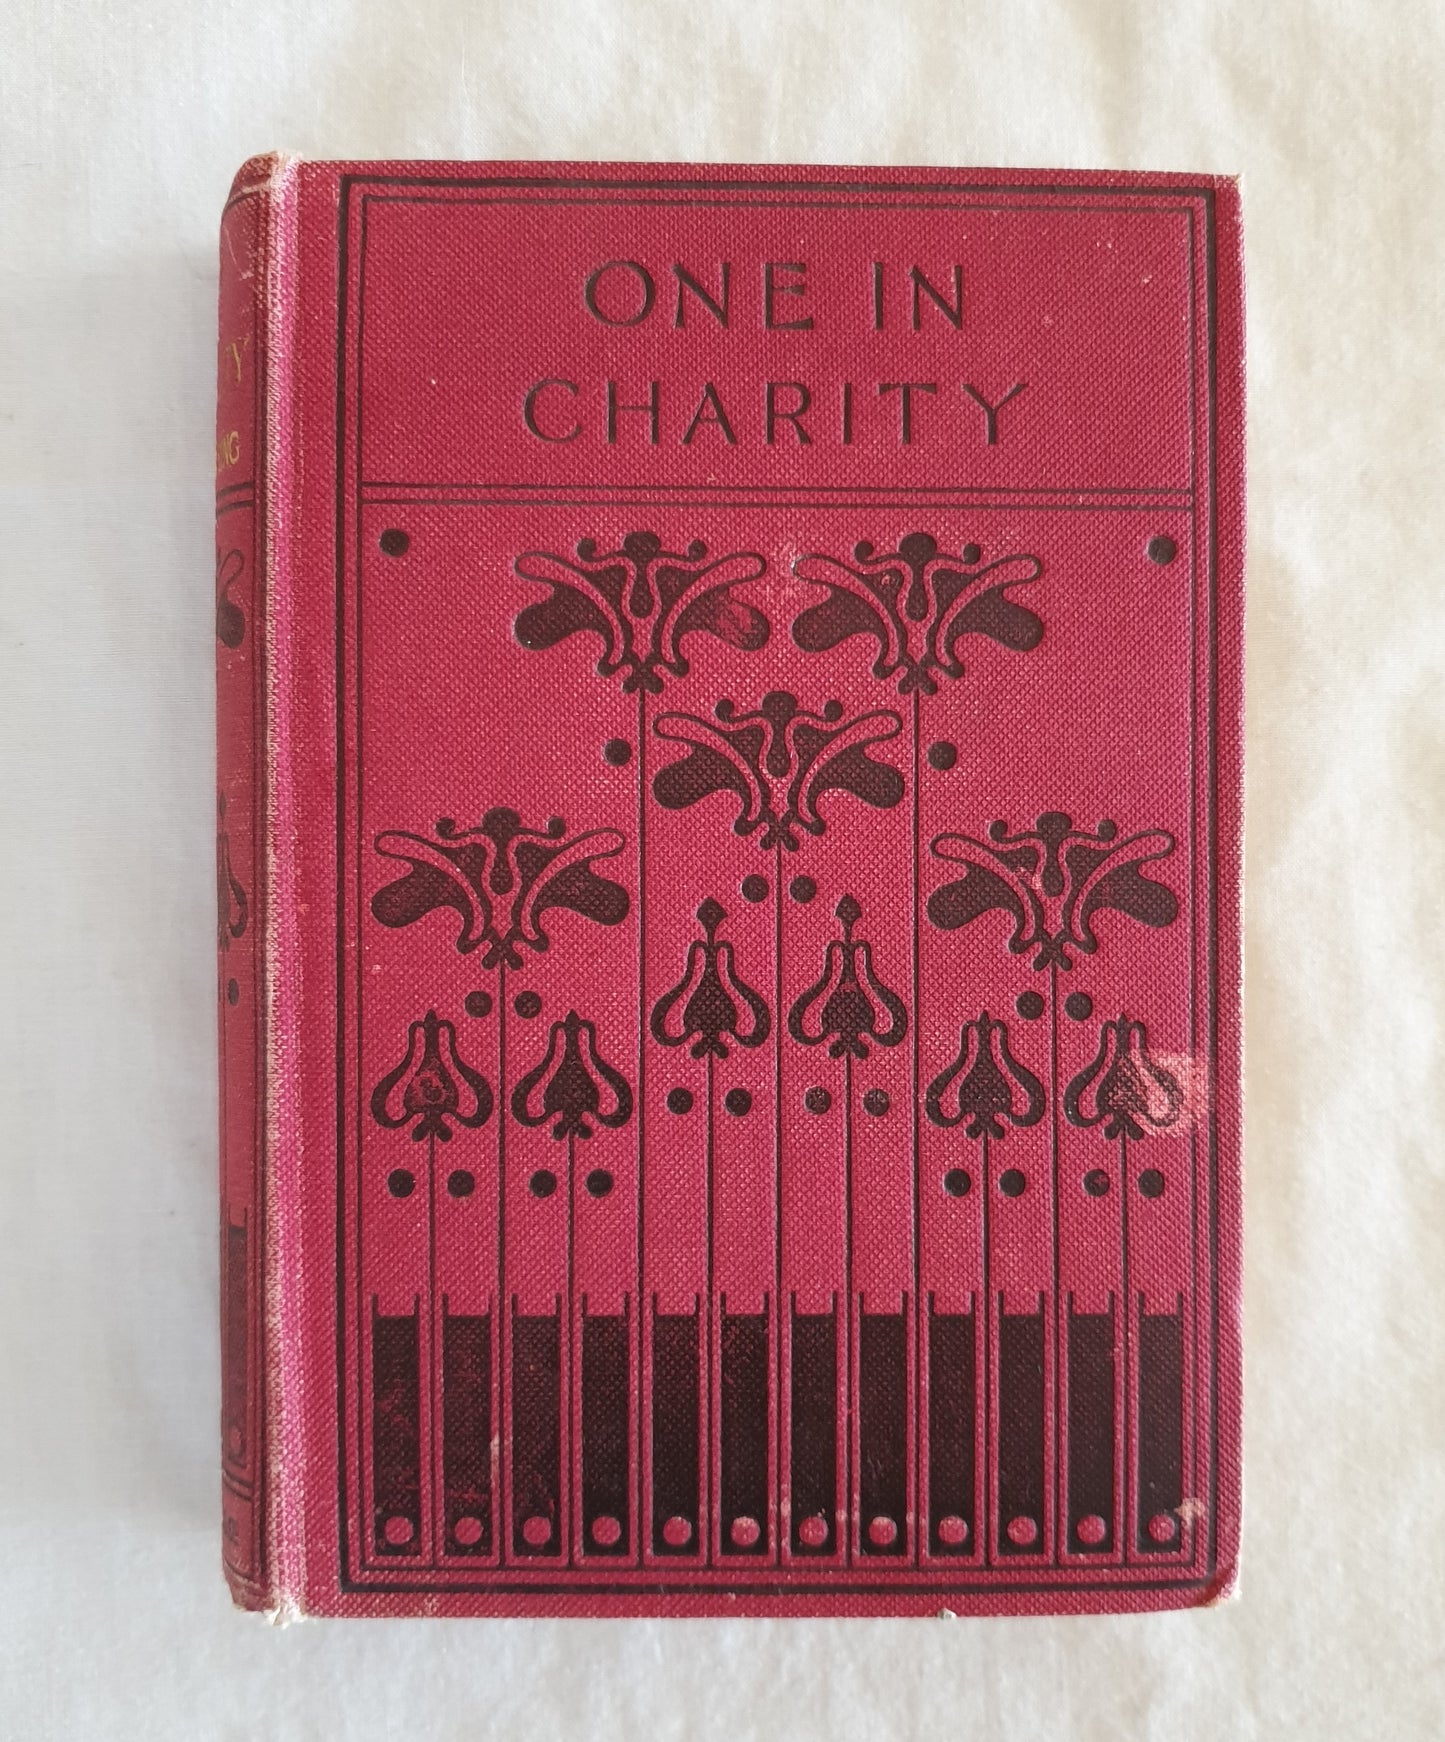 One In Charity by Silas K. Hocking